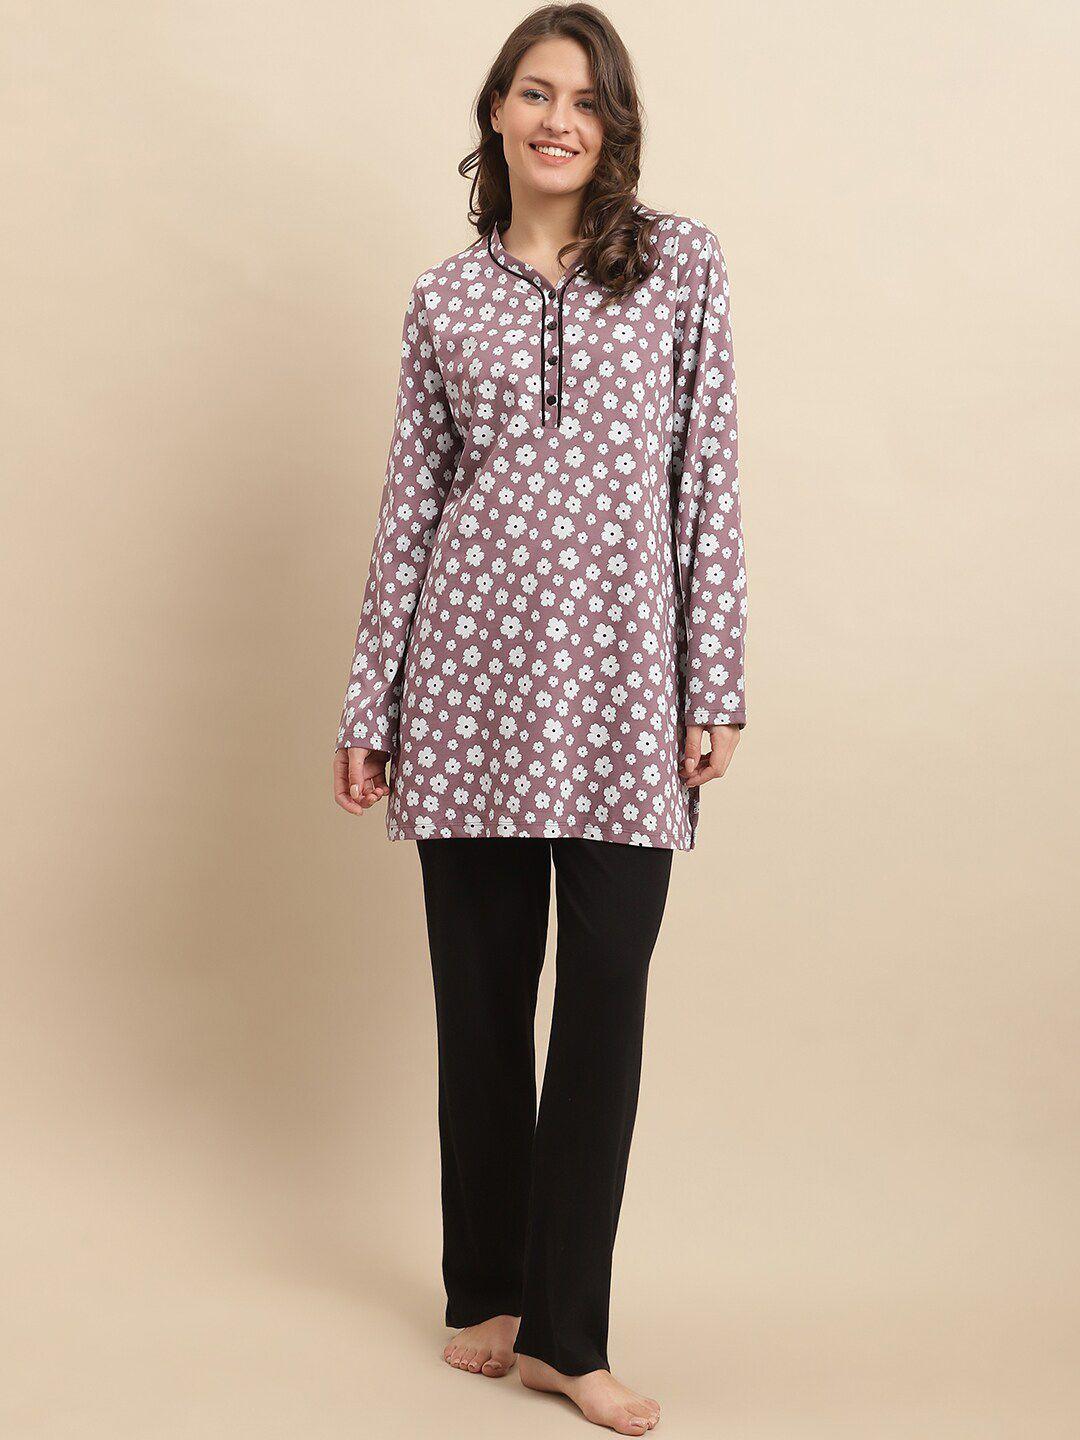 kanvin pink & black floral printed pure cotton night suit